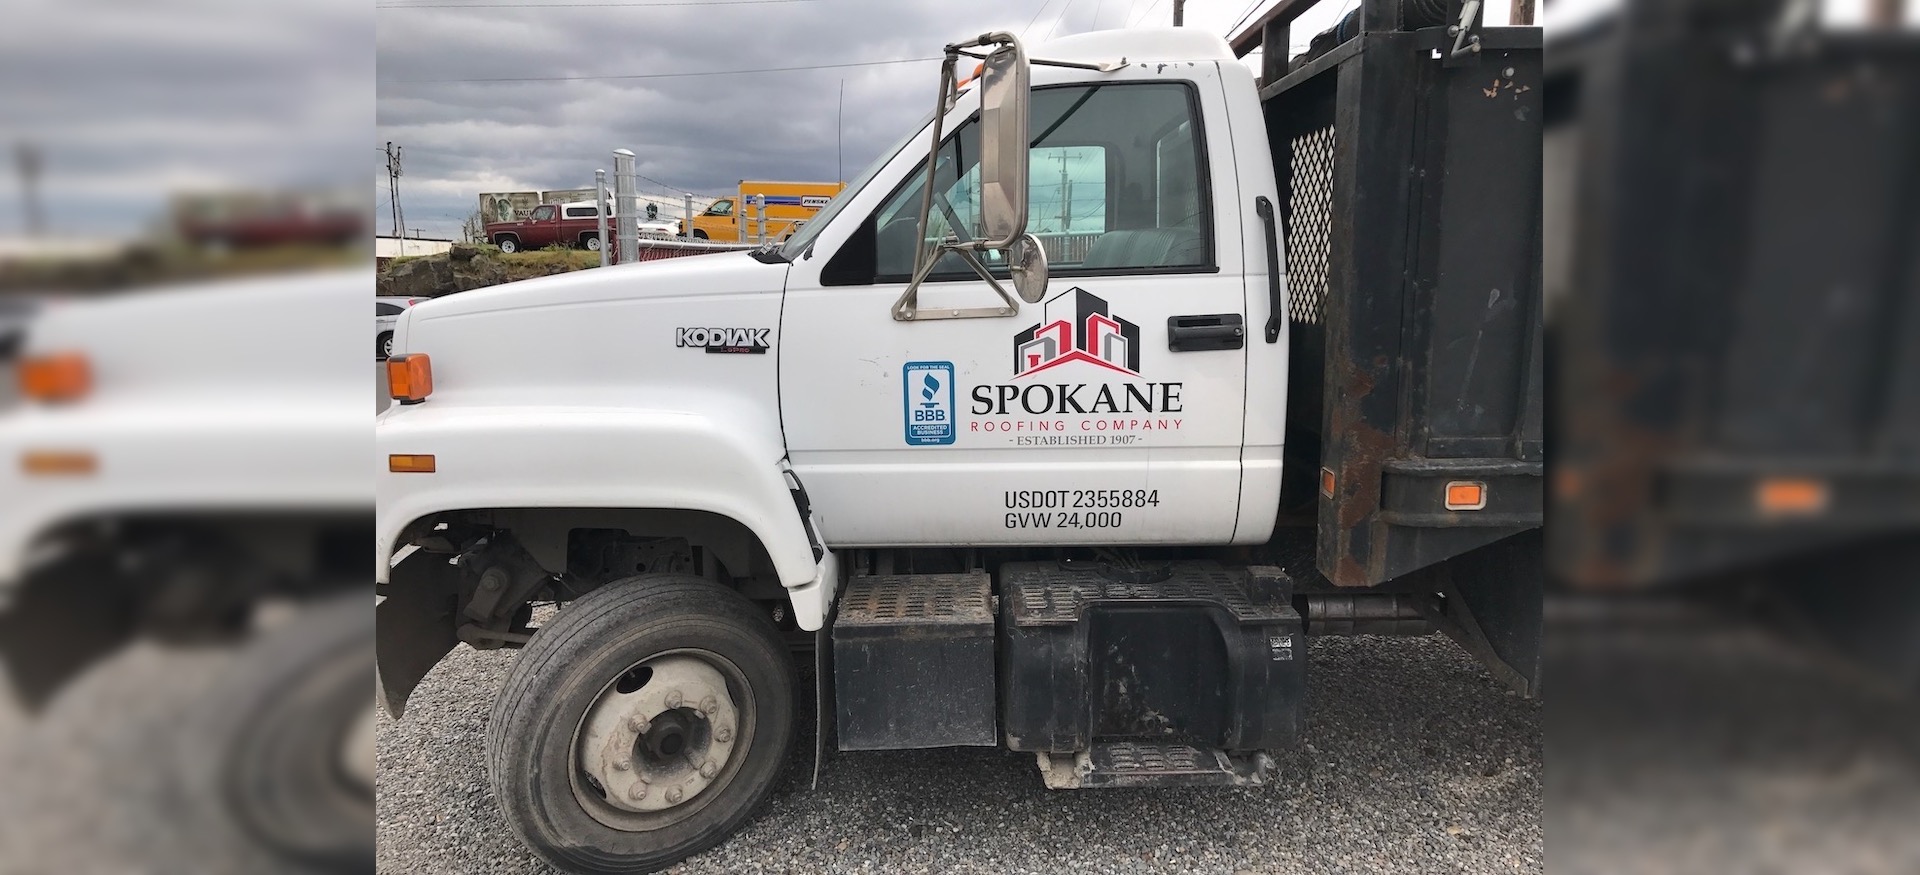 Spokane Roofing Truck With BBB Accredited Business Logo